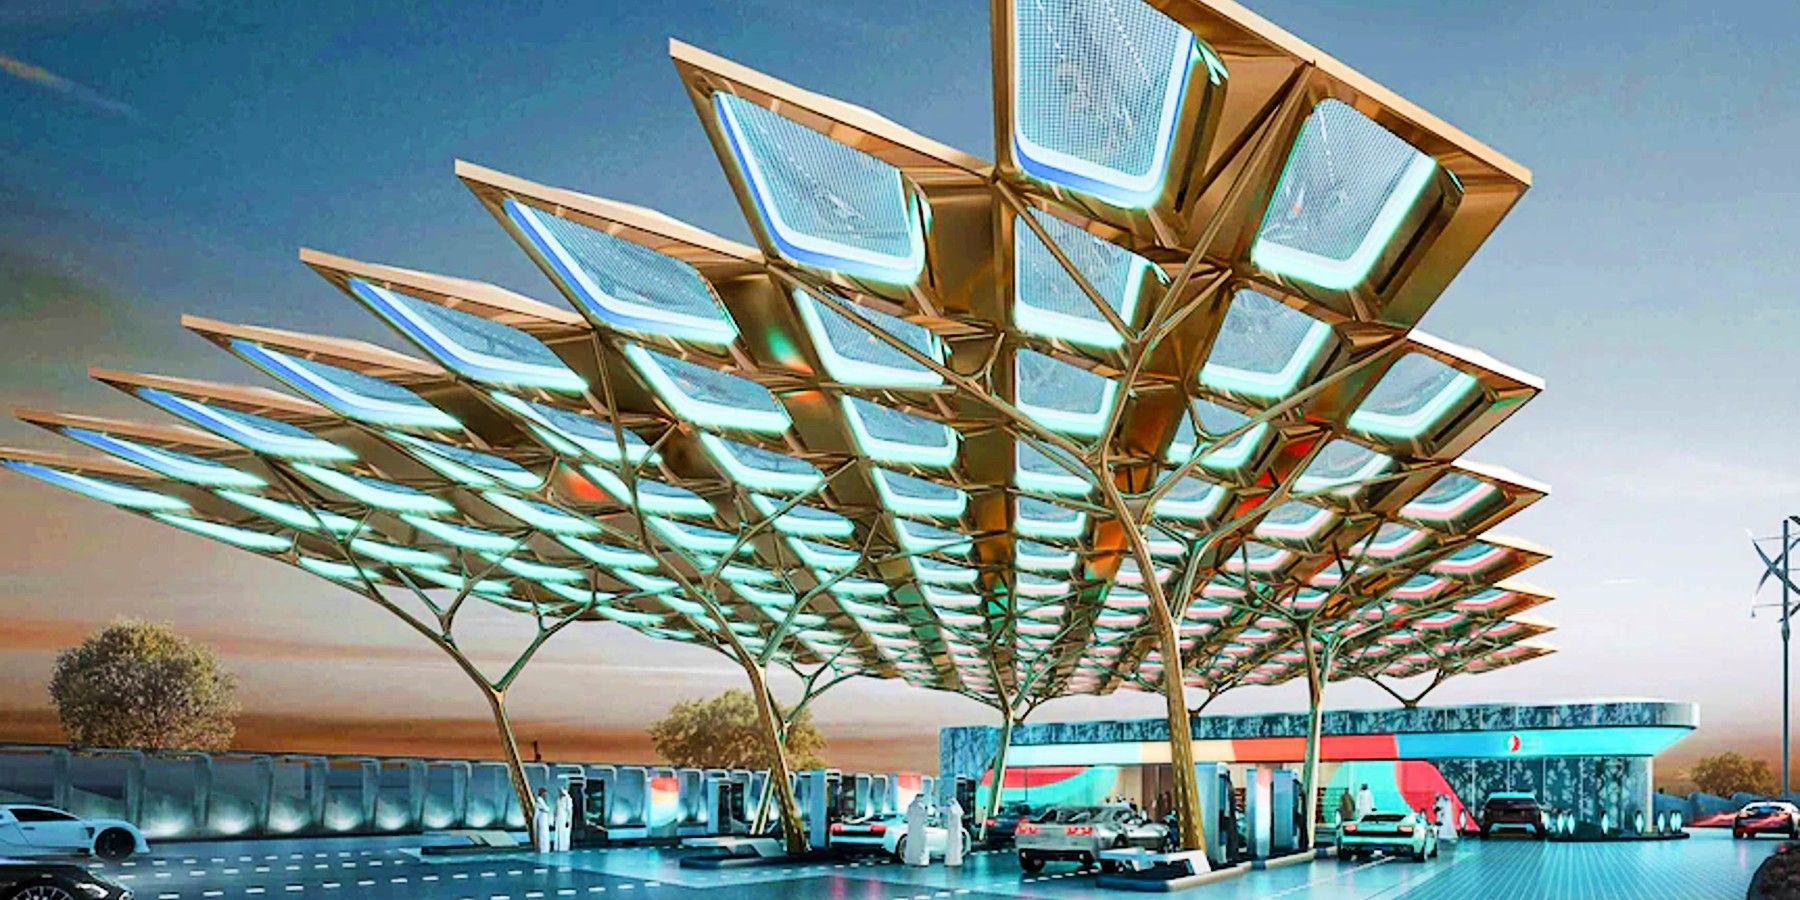 Service Station of the Future Built By ENOC